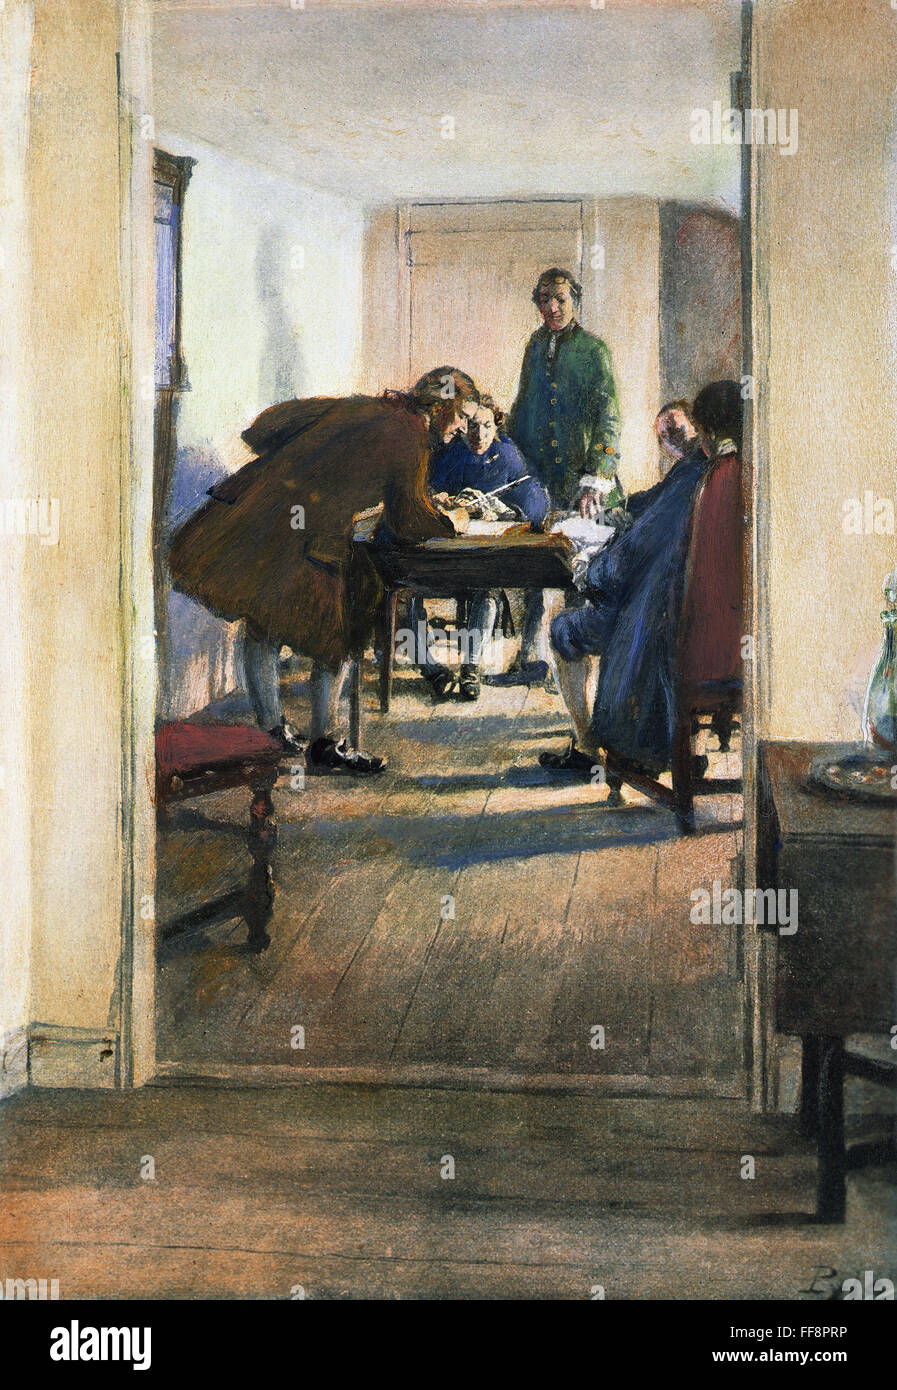 RALEIGH TAVERN, 1773. /nThomas Jefferson, Richard Henry Lee, Patrick Henry, and Francis Lightfoot Lee meeting at Raleigh Tavern, Williamsburg, Virginia, in 1773 to establish the Committee of Correspondence. Illustration by Howard Pyle, 1896. Stock Photo